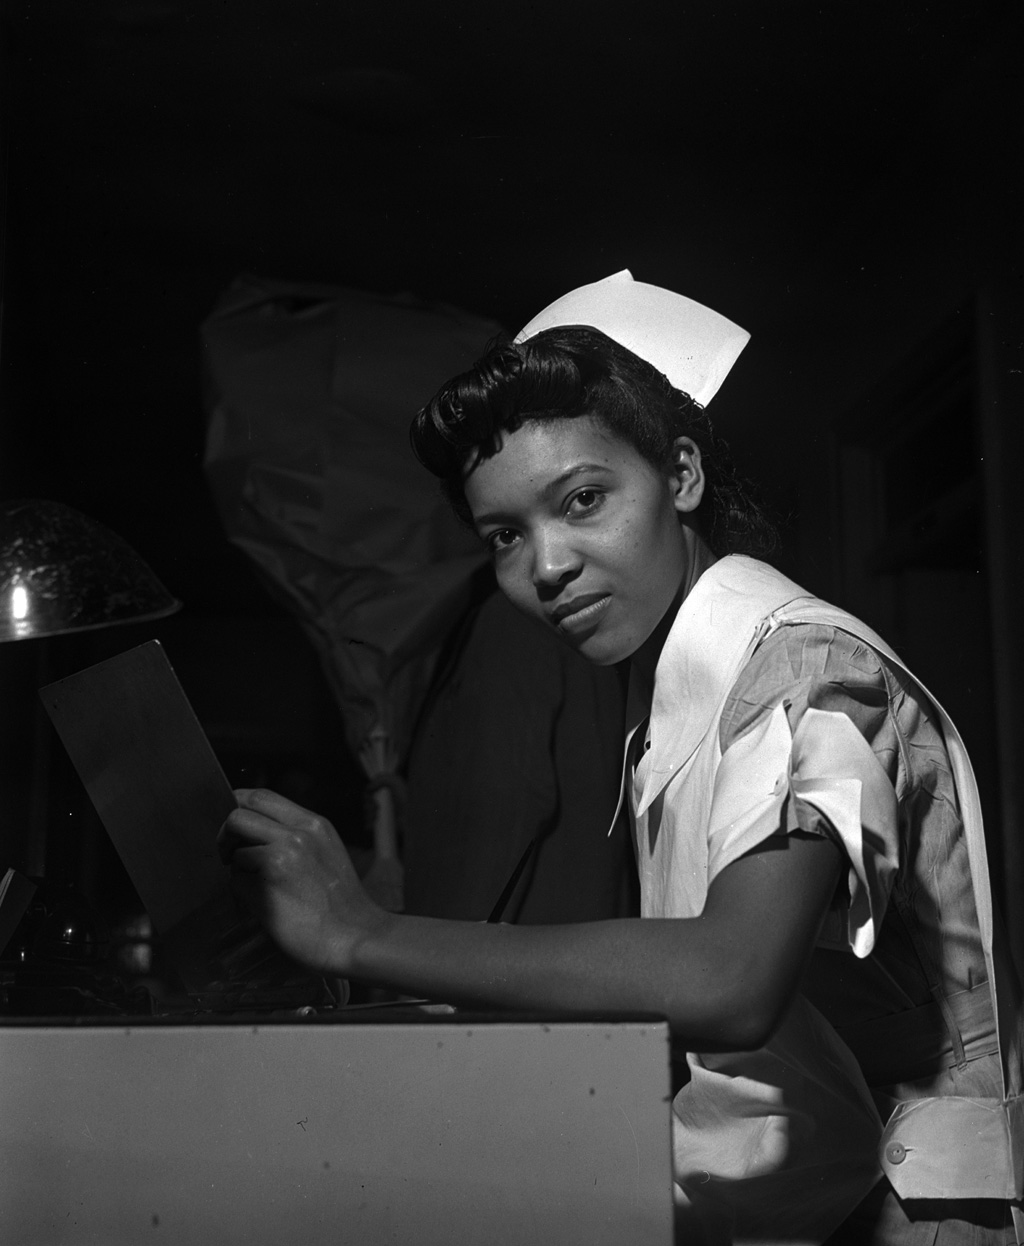 Lydia Monroe of Ringold, Louisiana, is a student nurse at Provident Hospital in Chicago, Illinois. Her father is a machinist at the Youngstown Sheet and Tube Company. Photo by Jack Delano, March, 1942. View full size.